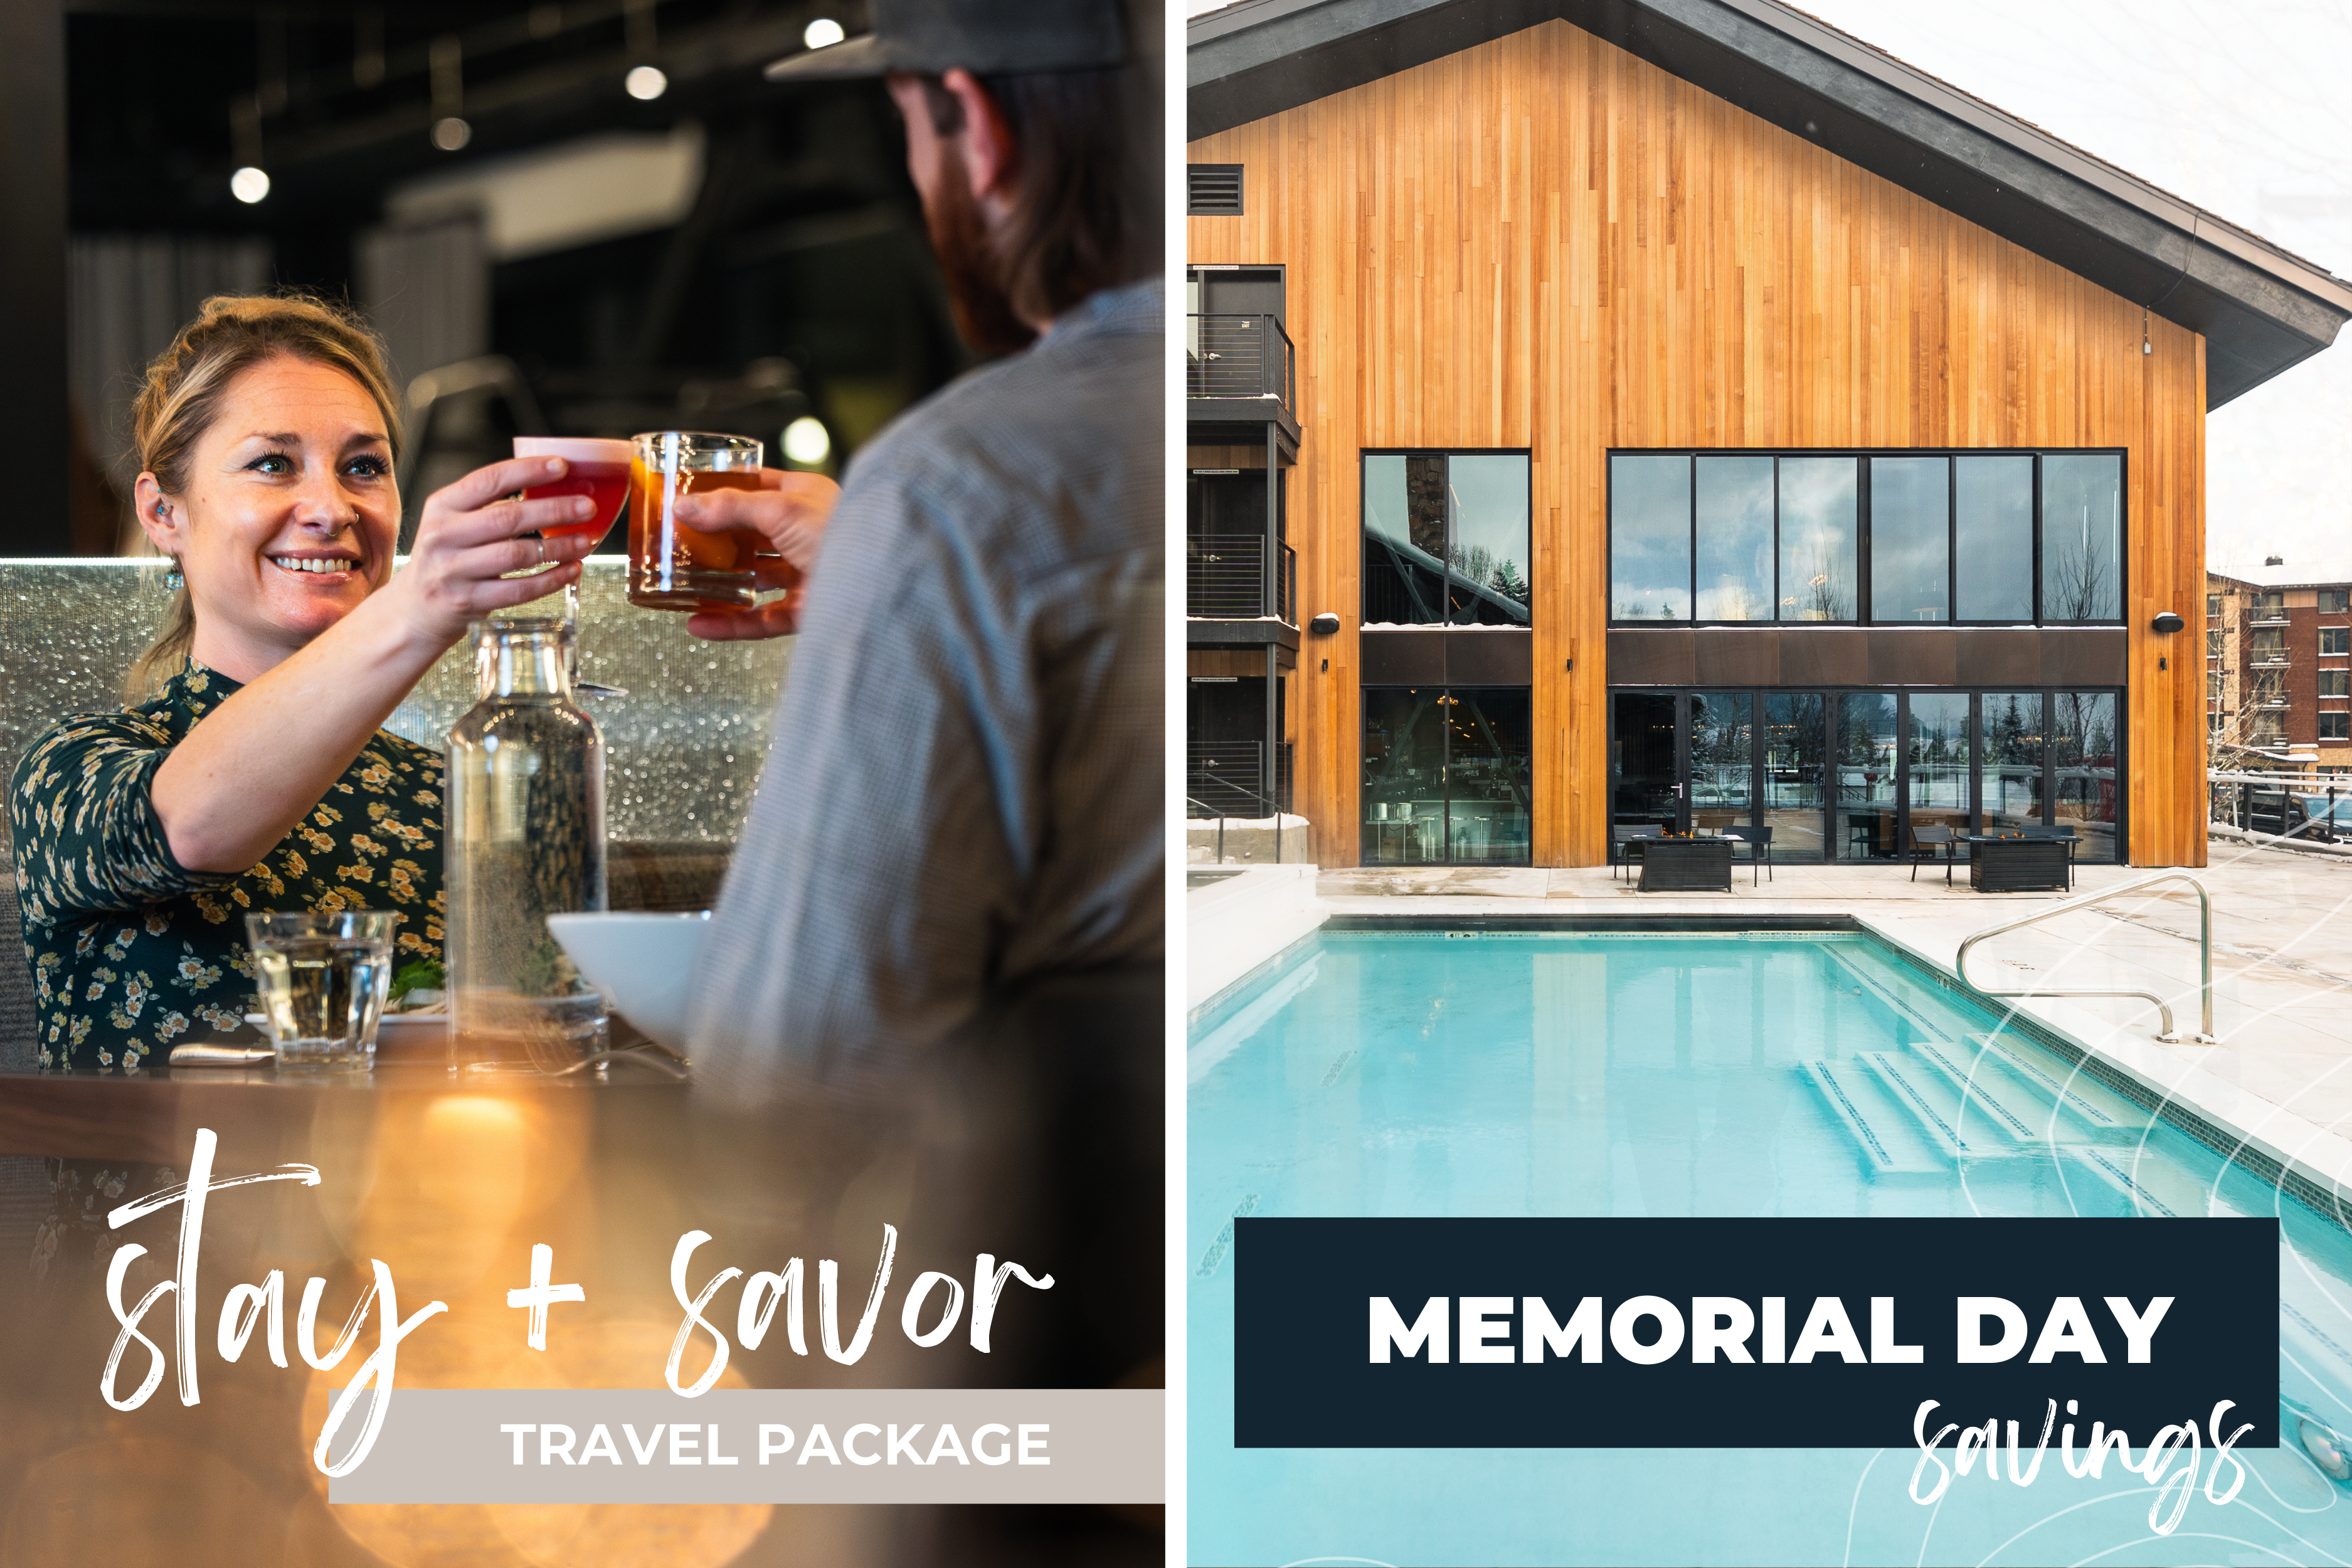 Gravity Haus Jackson Hole Stay + Savor and Memorial Day Promo